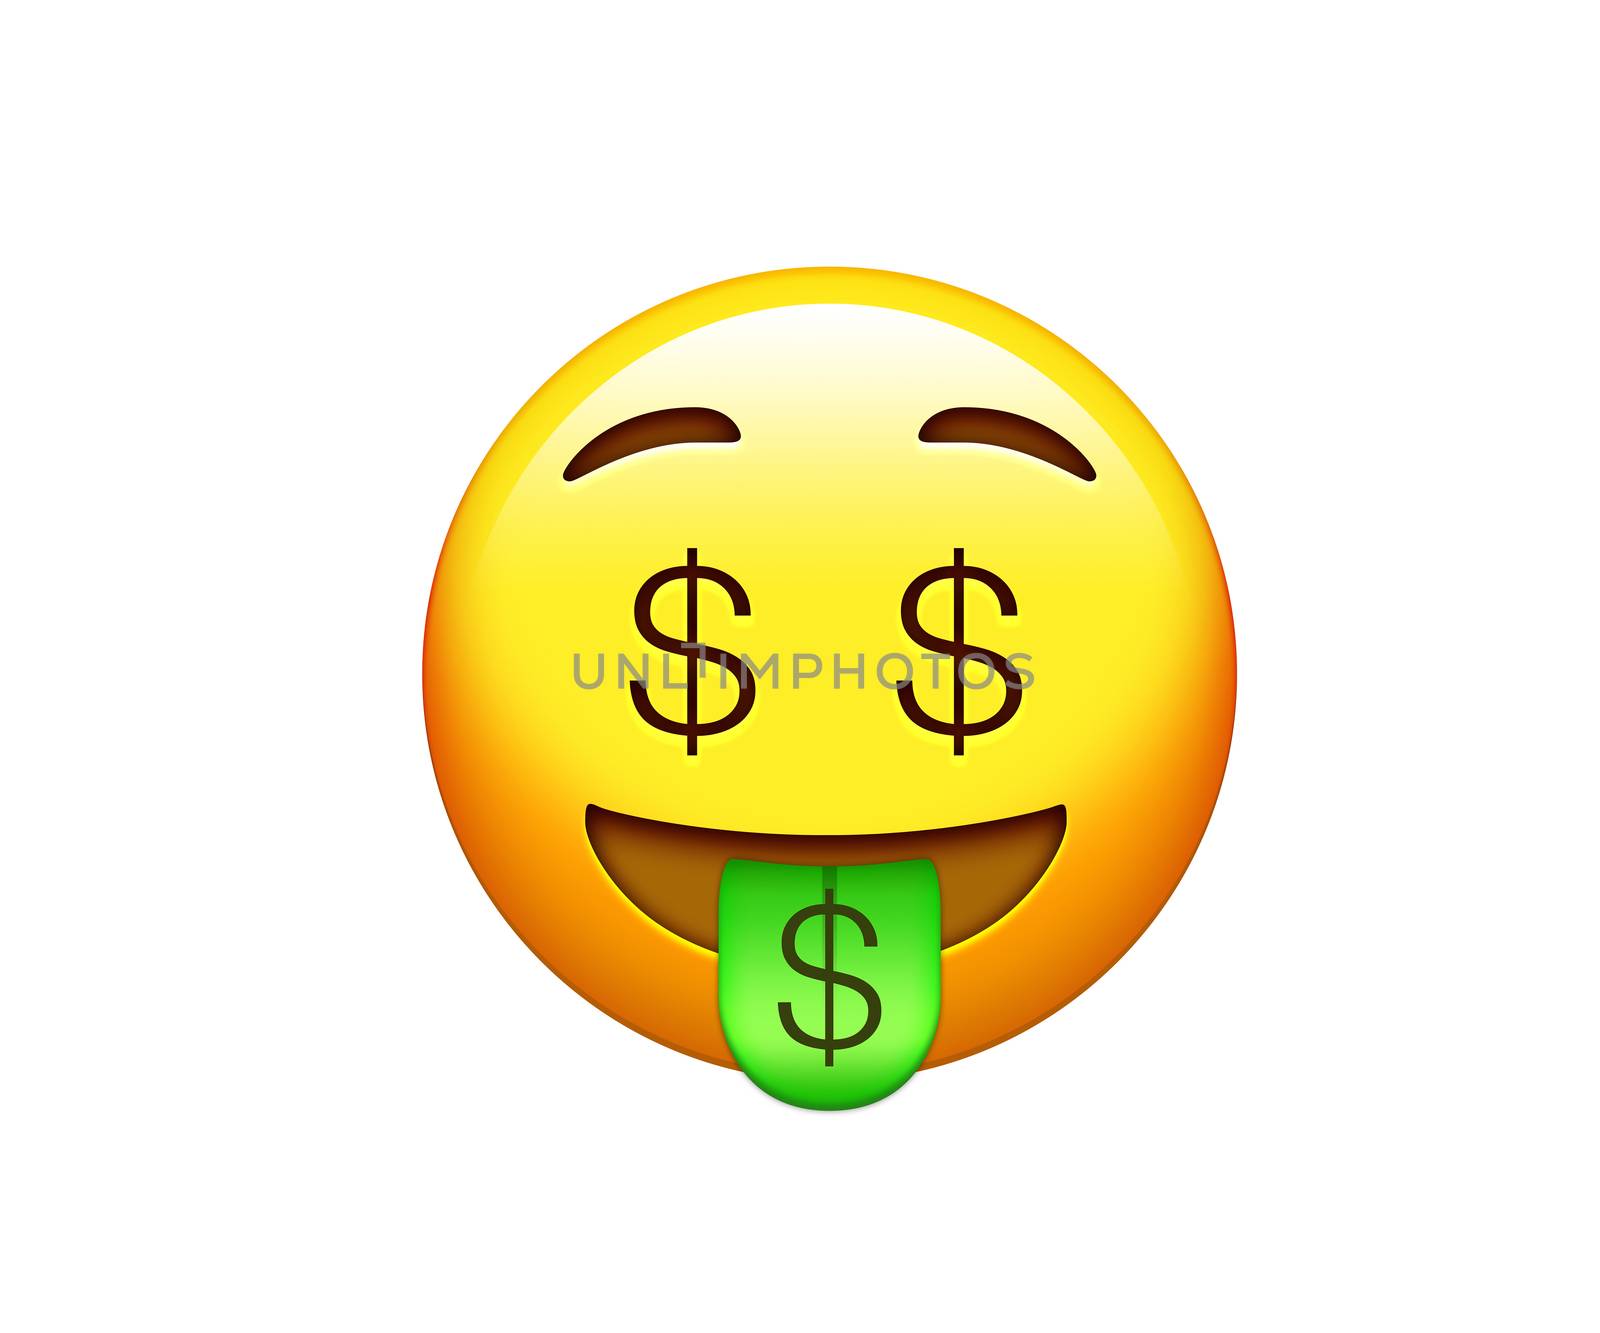 The emoji yellow happy and laugh face with dollar eyes and tongue out